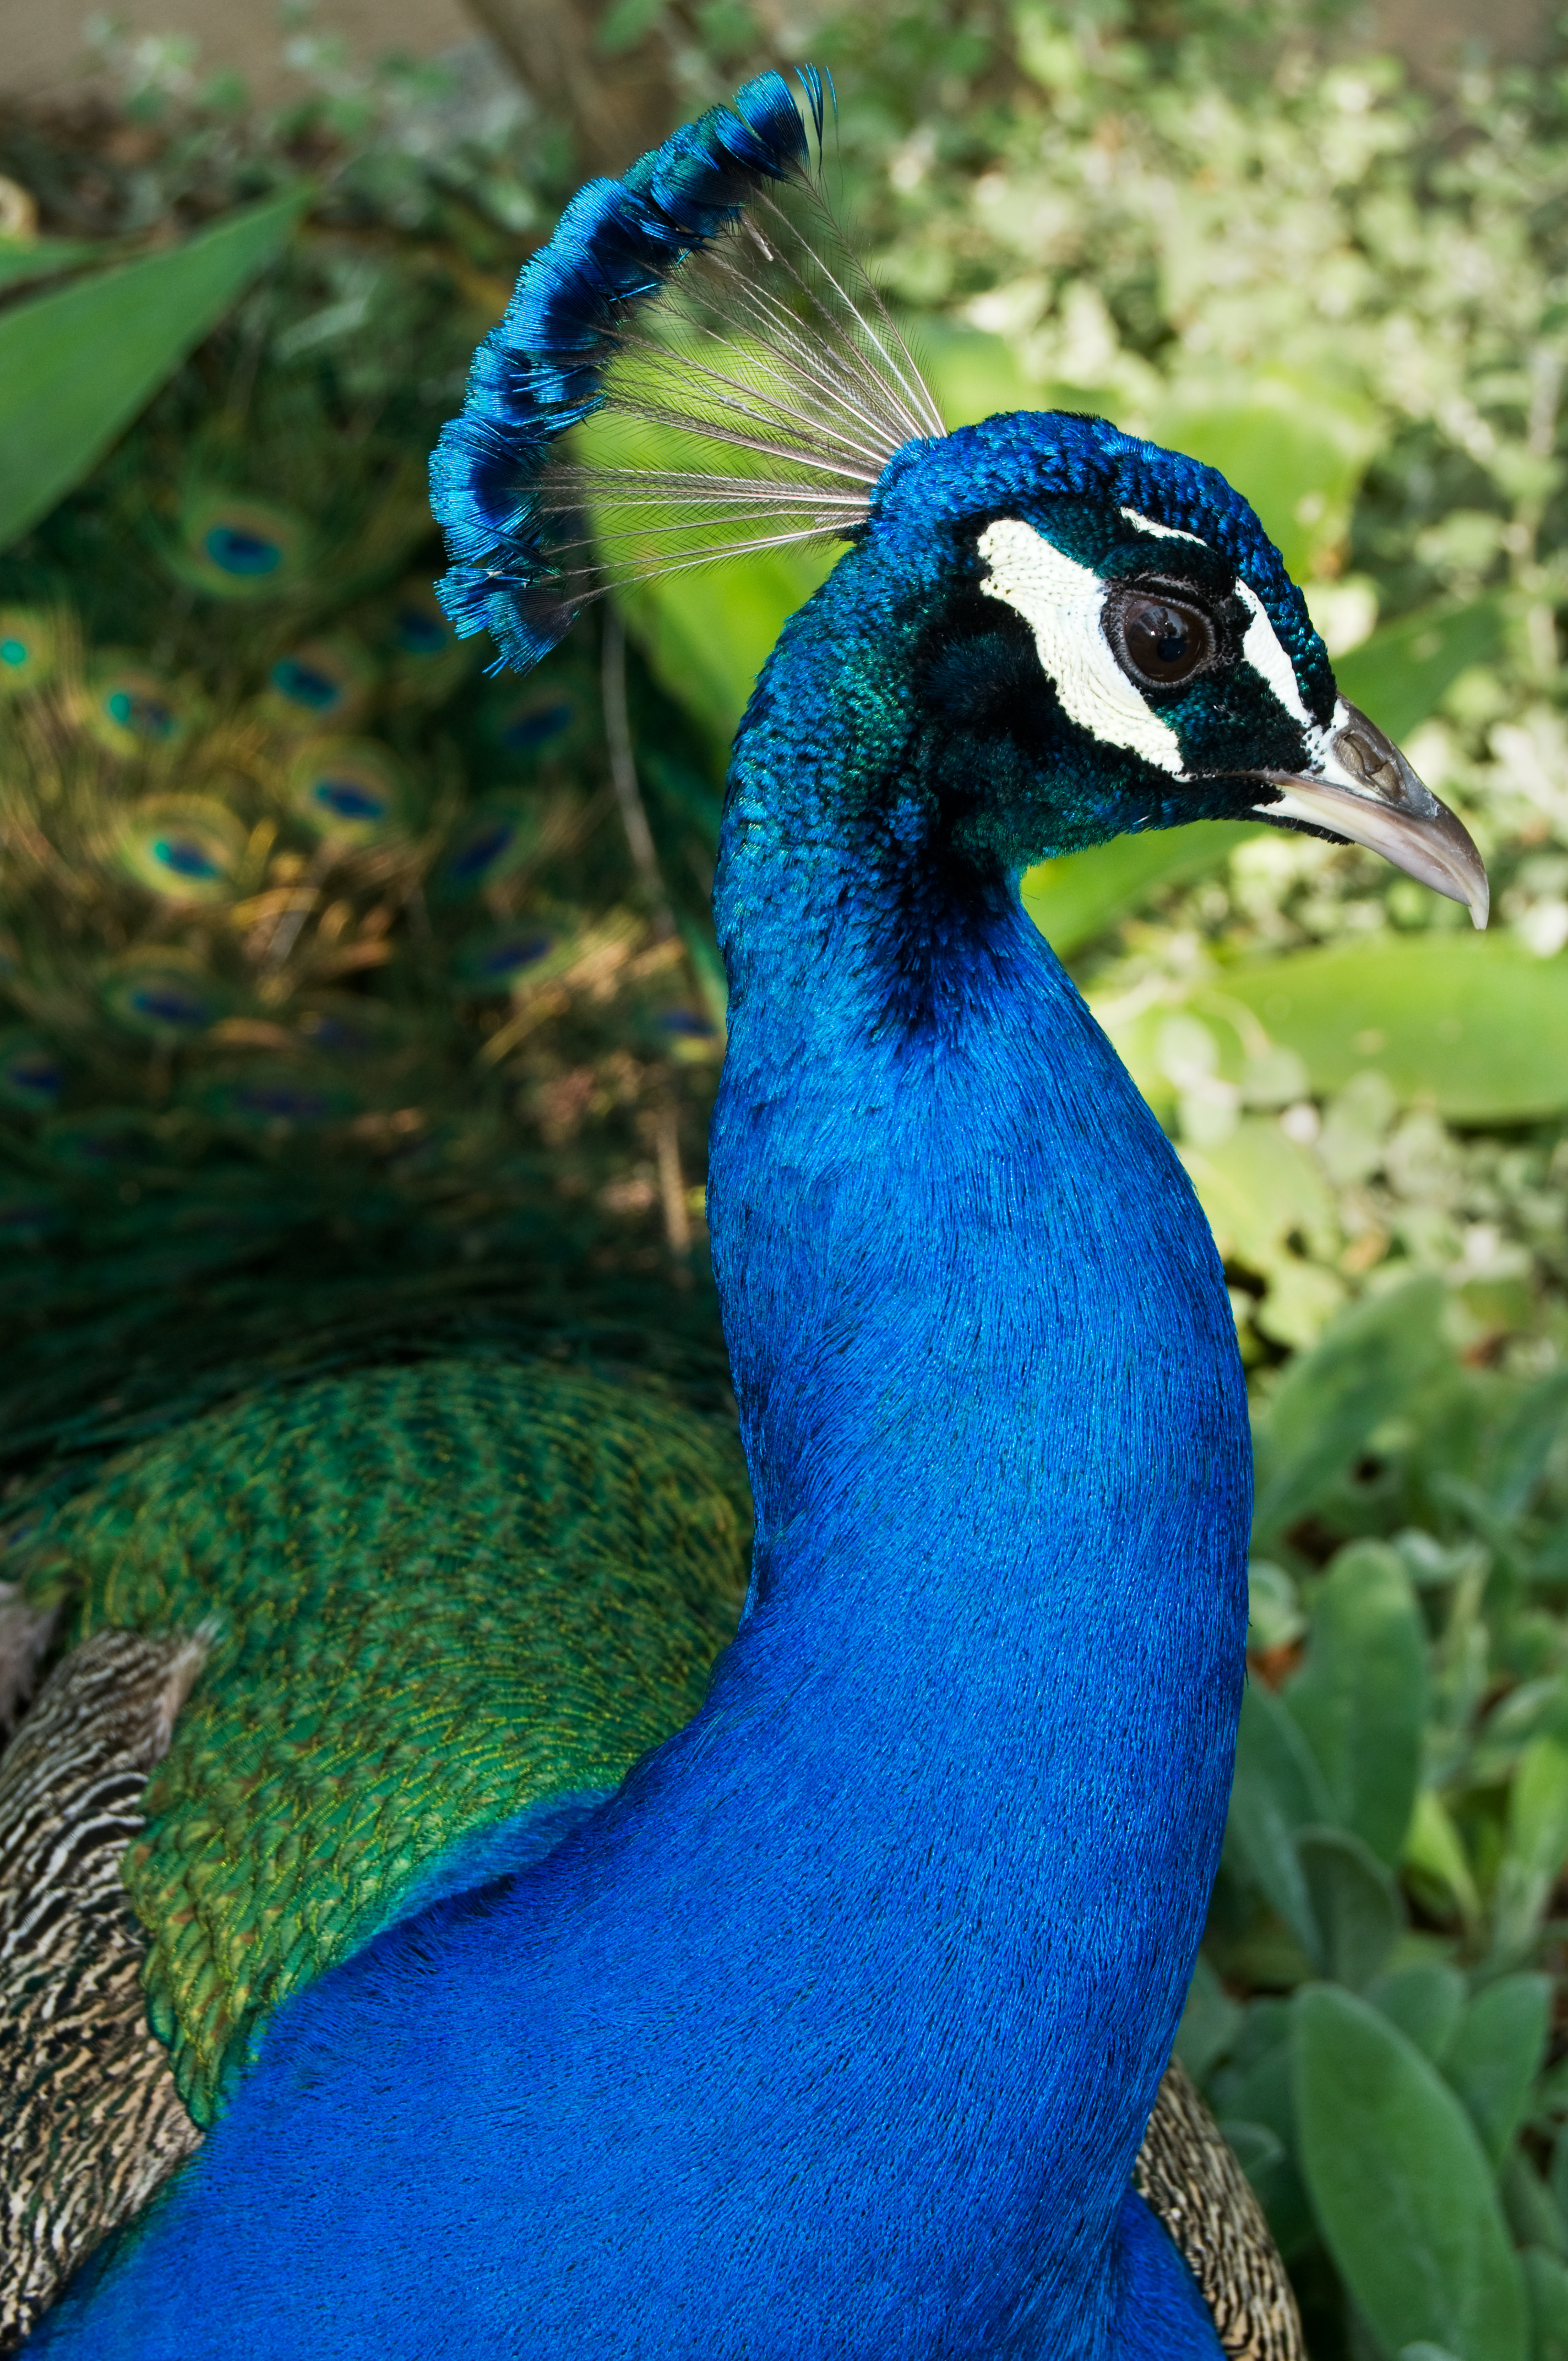 File:Male peacock close-up.jpg - Wikimedia Commons